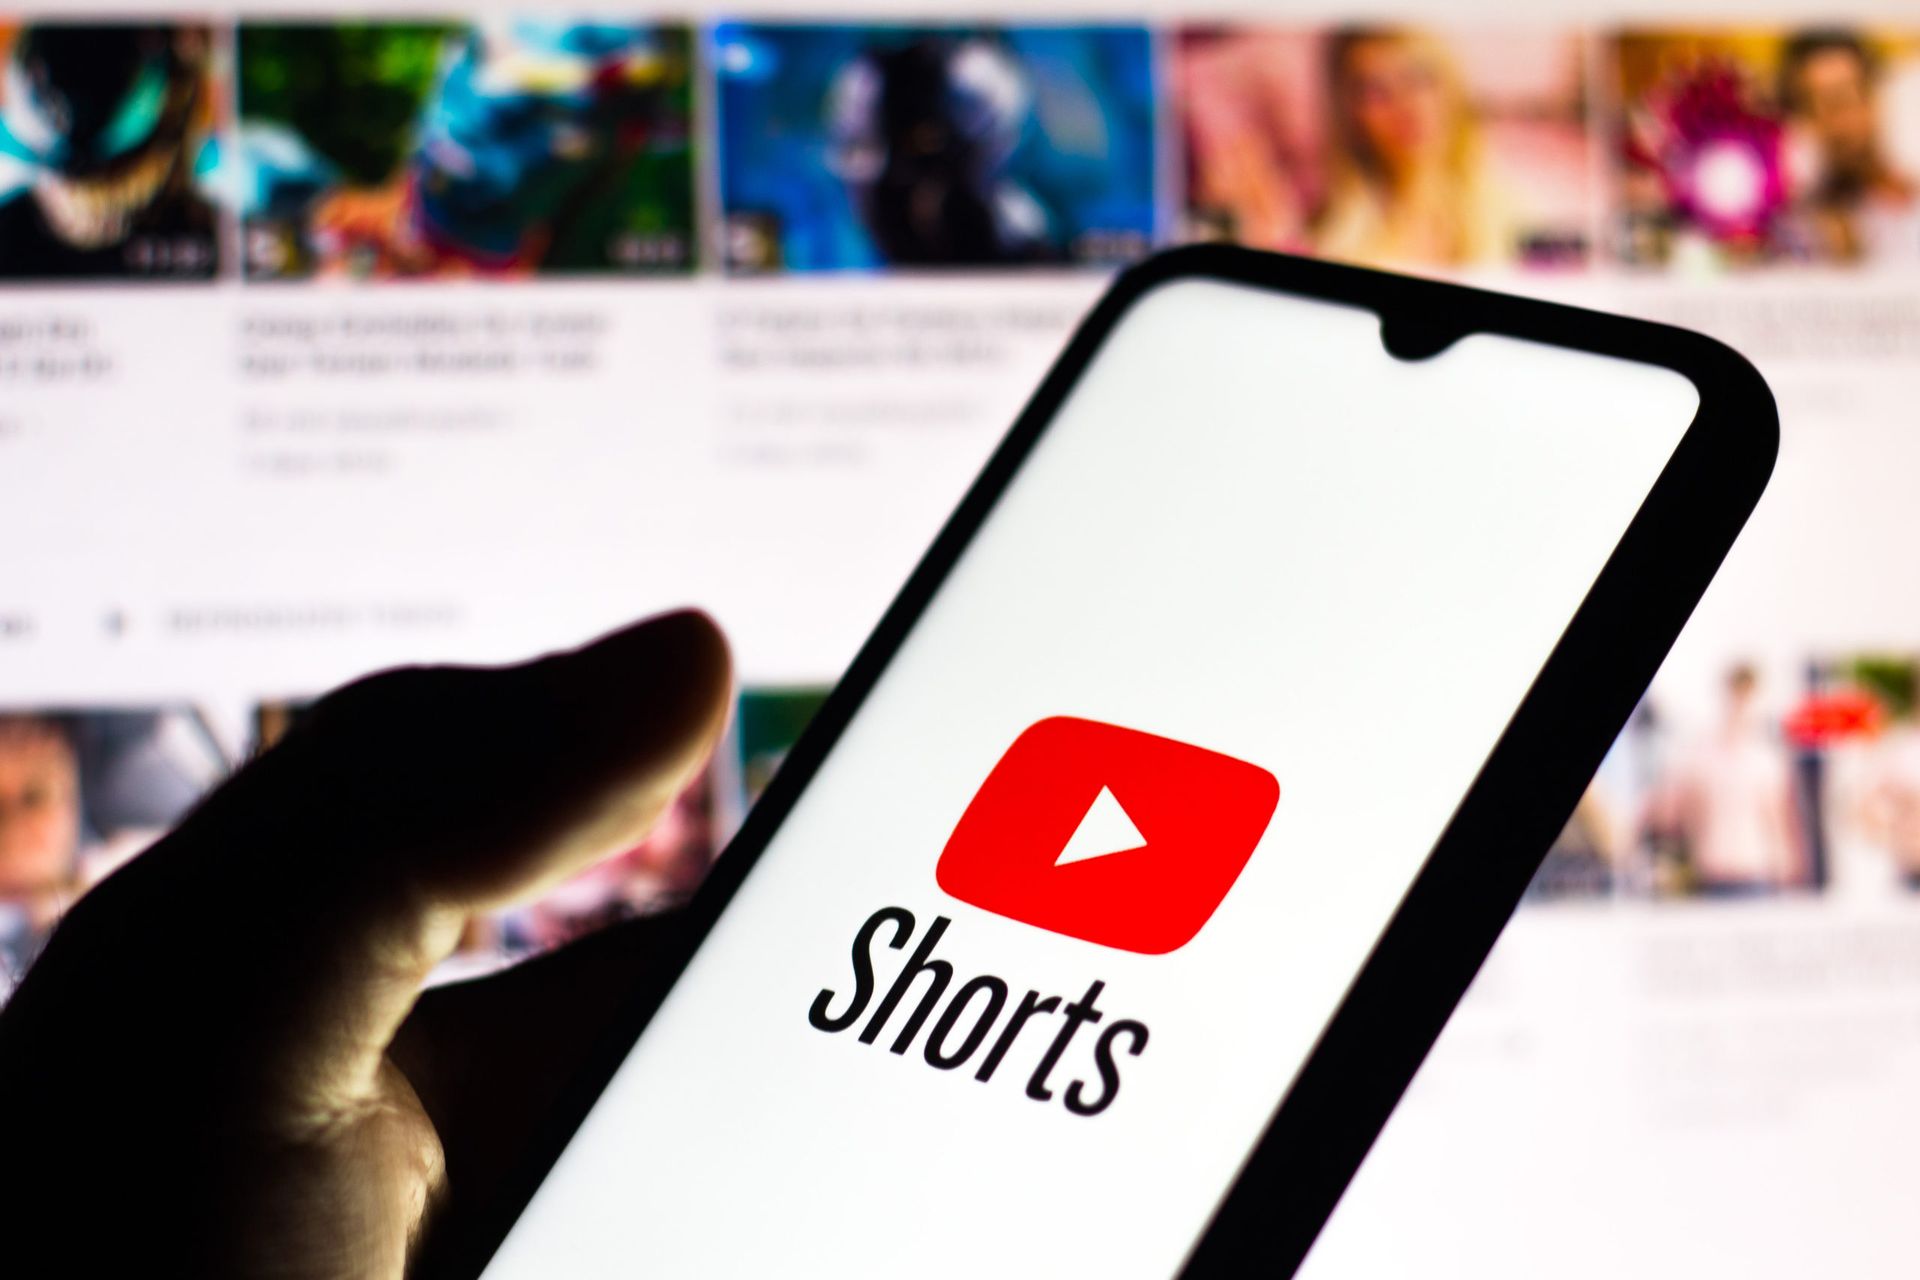 How to download YouTube Shorts?